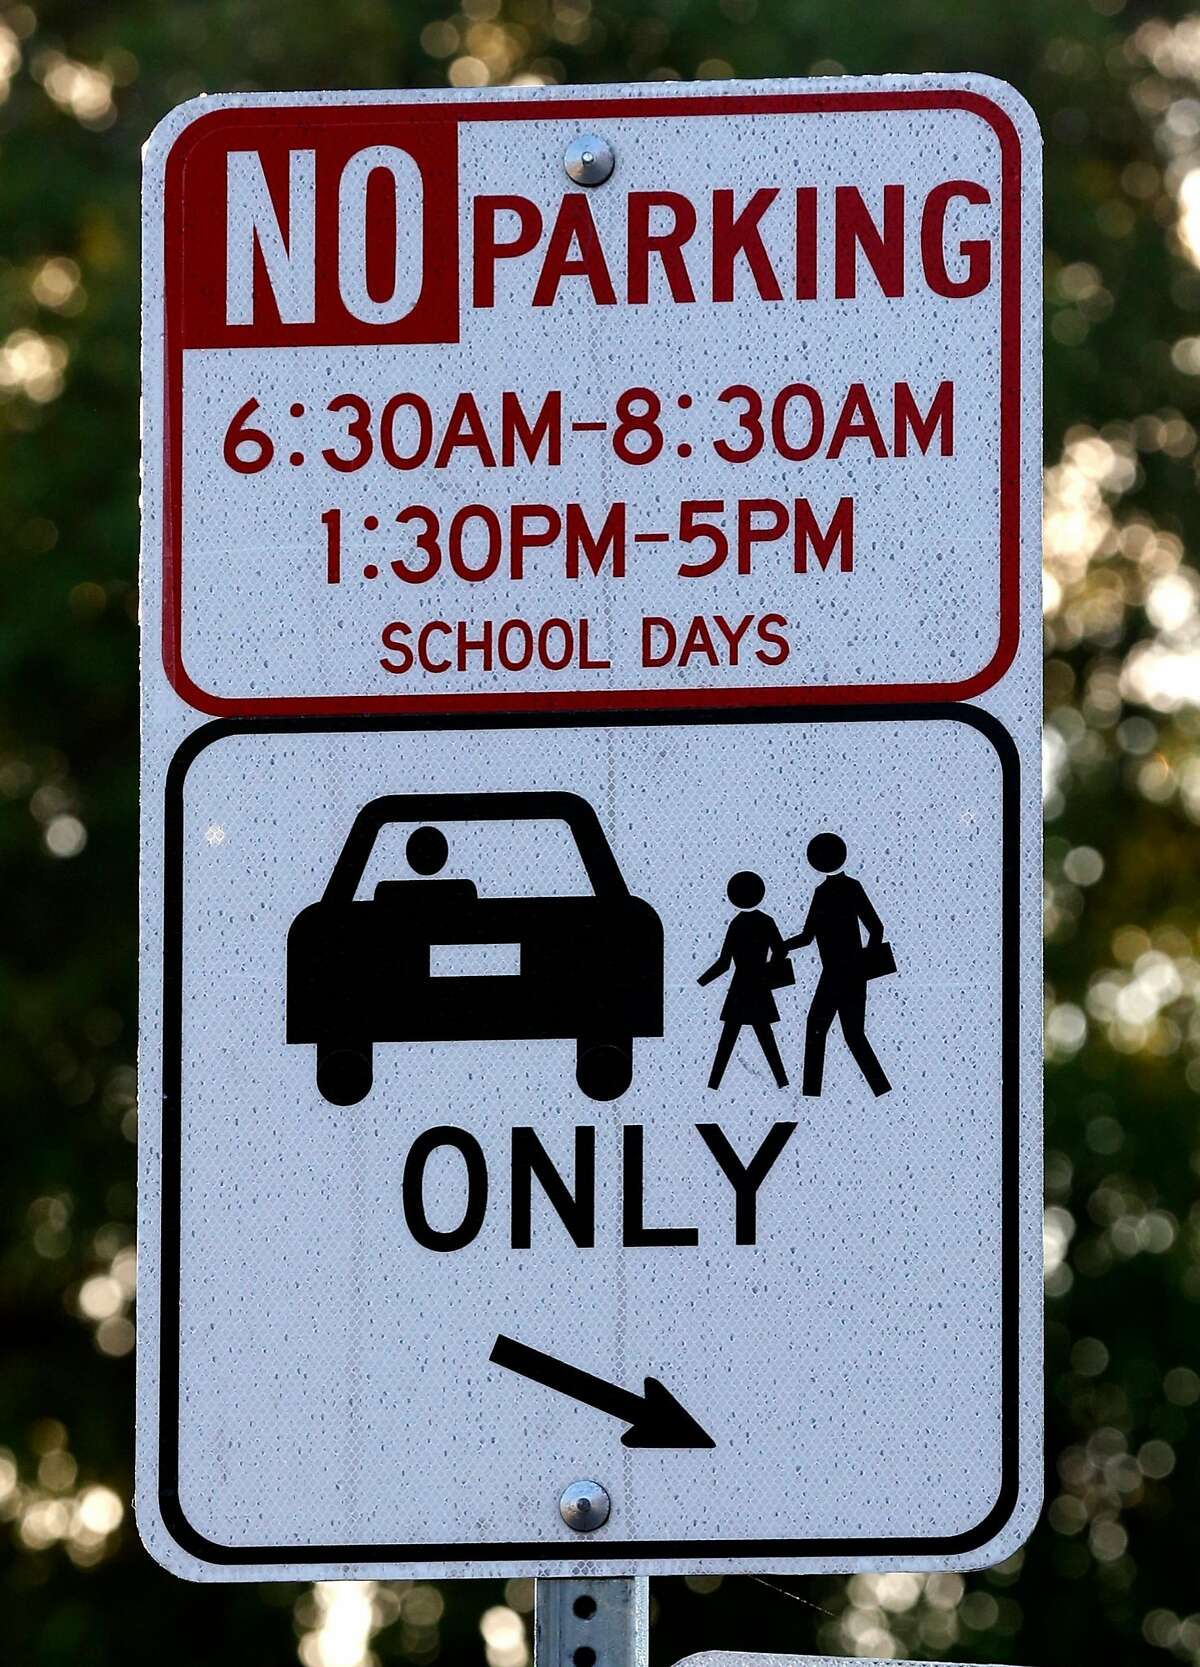 A special drop-off zone is designated for parents of Glenview Elementary School students on East 38th and Beaumont avenues in Oakland, Calif. on Friday, Nov. 17, 2017. Students are being bused to Santa Fe Elementary in North Oakland during reconstruction of their school. Delays and increased costs in the reconstruction of Glenview Elementary have angered parents and residents.